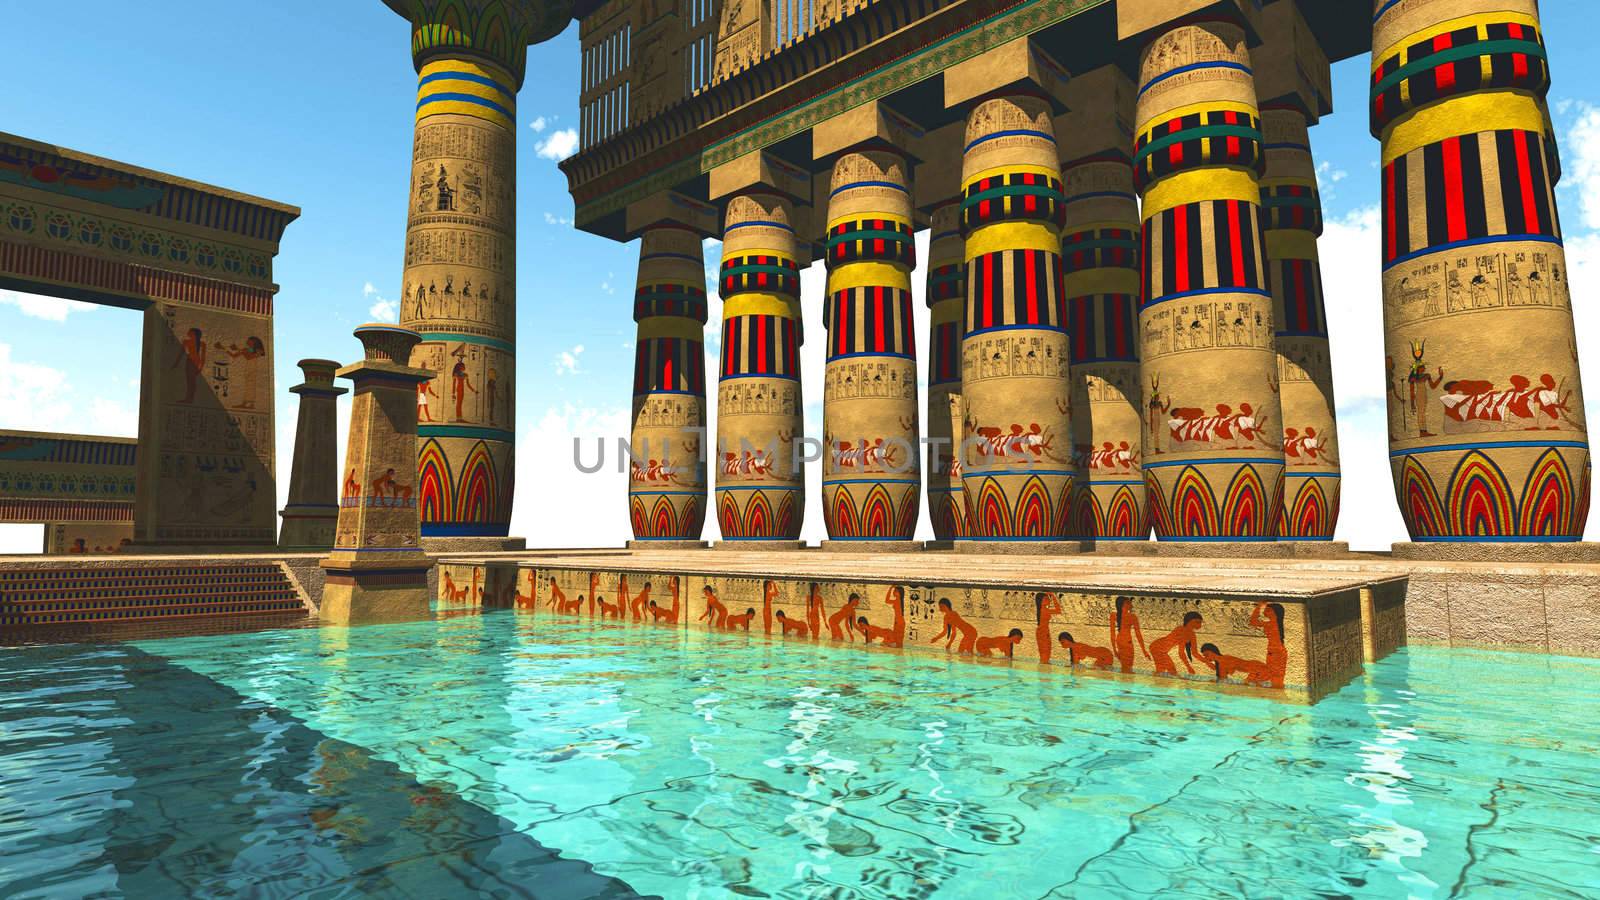 Egyptian swimming pool in a temple